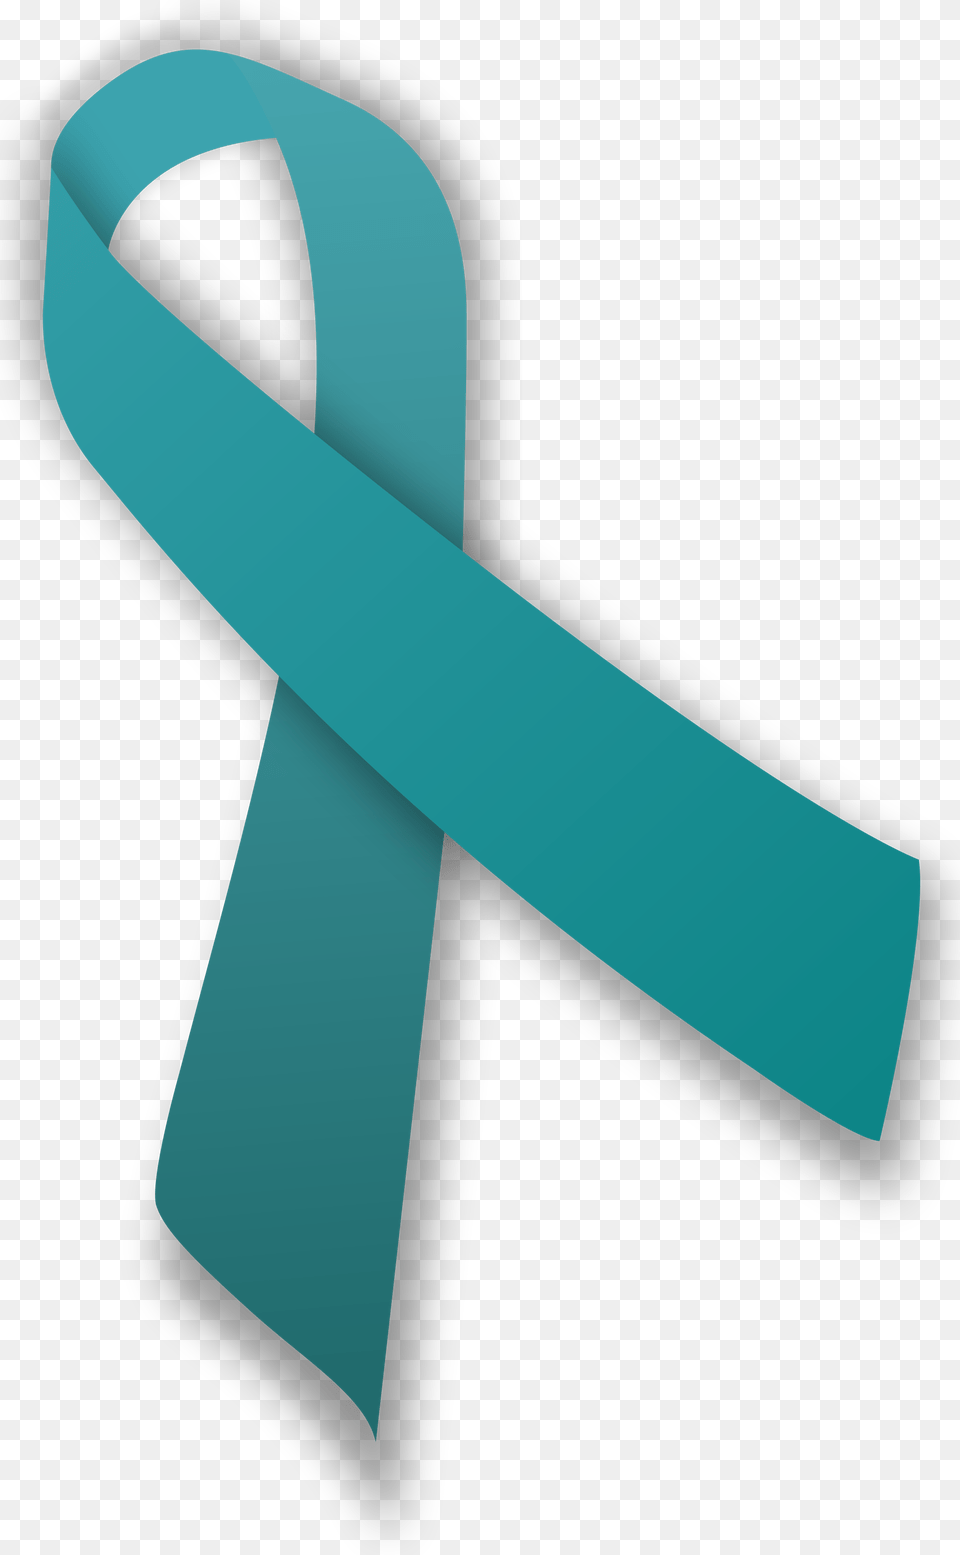 Turquoise Ribbon Wikipedia Sexual Assault Awareness Month Ribbon, Accessories, Formal Wear, Tie, Belt Png Image